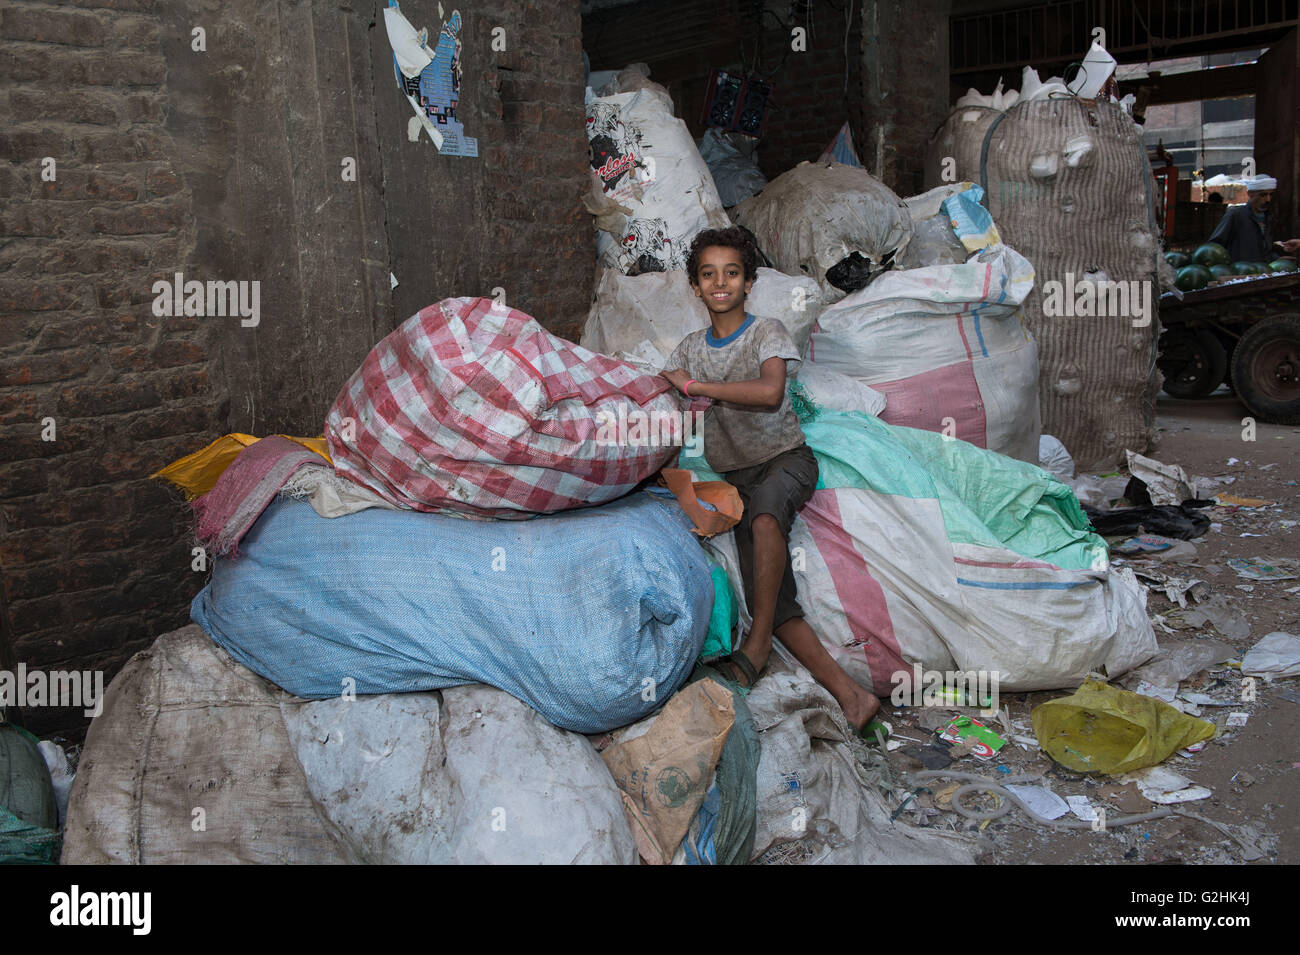 Cairo, Egypt. 27th May, 2016. Thirteen-year-old Steven collects garbage at the Al-Mokattam City, also known as the 'Garbage City', in Cairo, capital of Egypt, on May 27, 2016. Living on the outskirts of Cairo, the Zabalen, which literally means 'garbage people', is a community that has been collecting and recycling Cairo's waste for a long time. They collected and sorted the waste for a living at Al-Mokattam City. The children here live and play among the garbage and lots of them have dropped out of school to help their family's garbage business. © Meng Tao/Xinhua/Alamy Live News Stock Photo